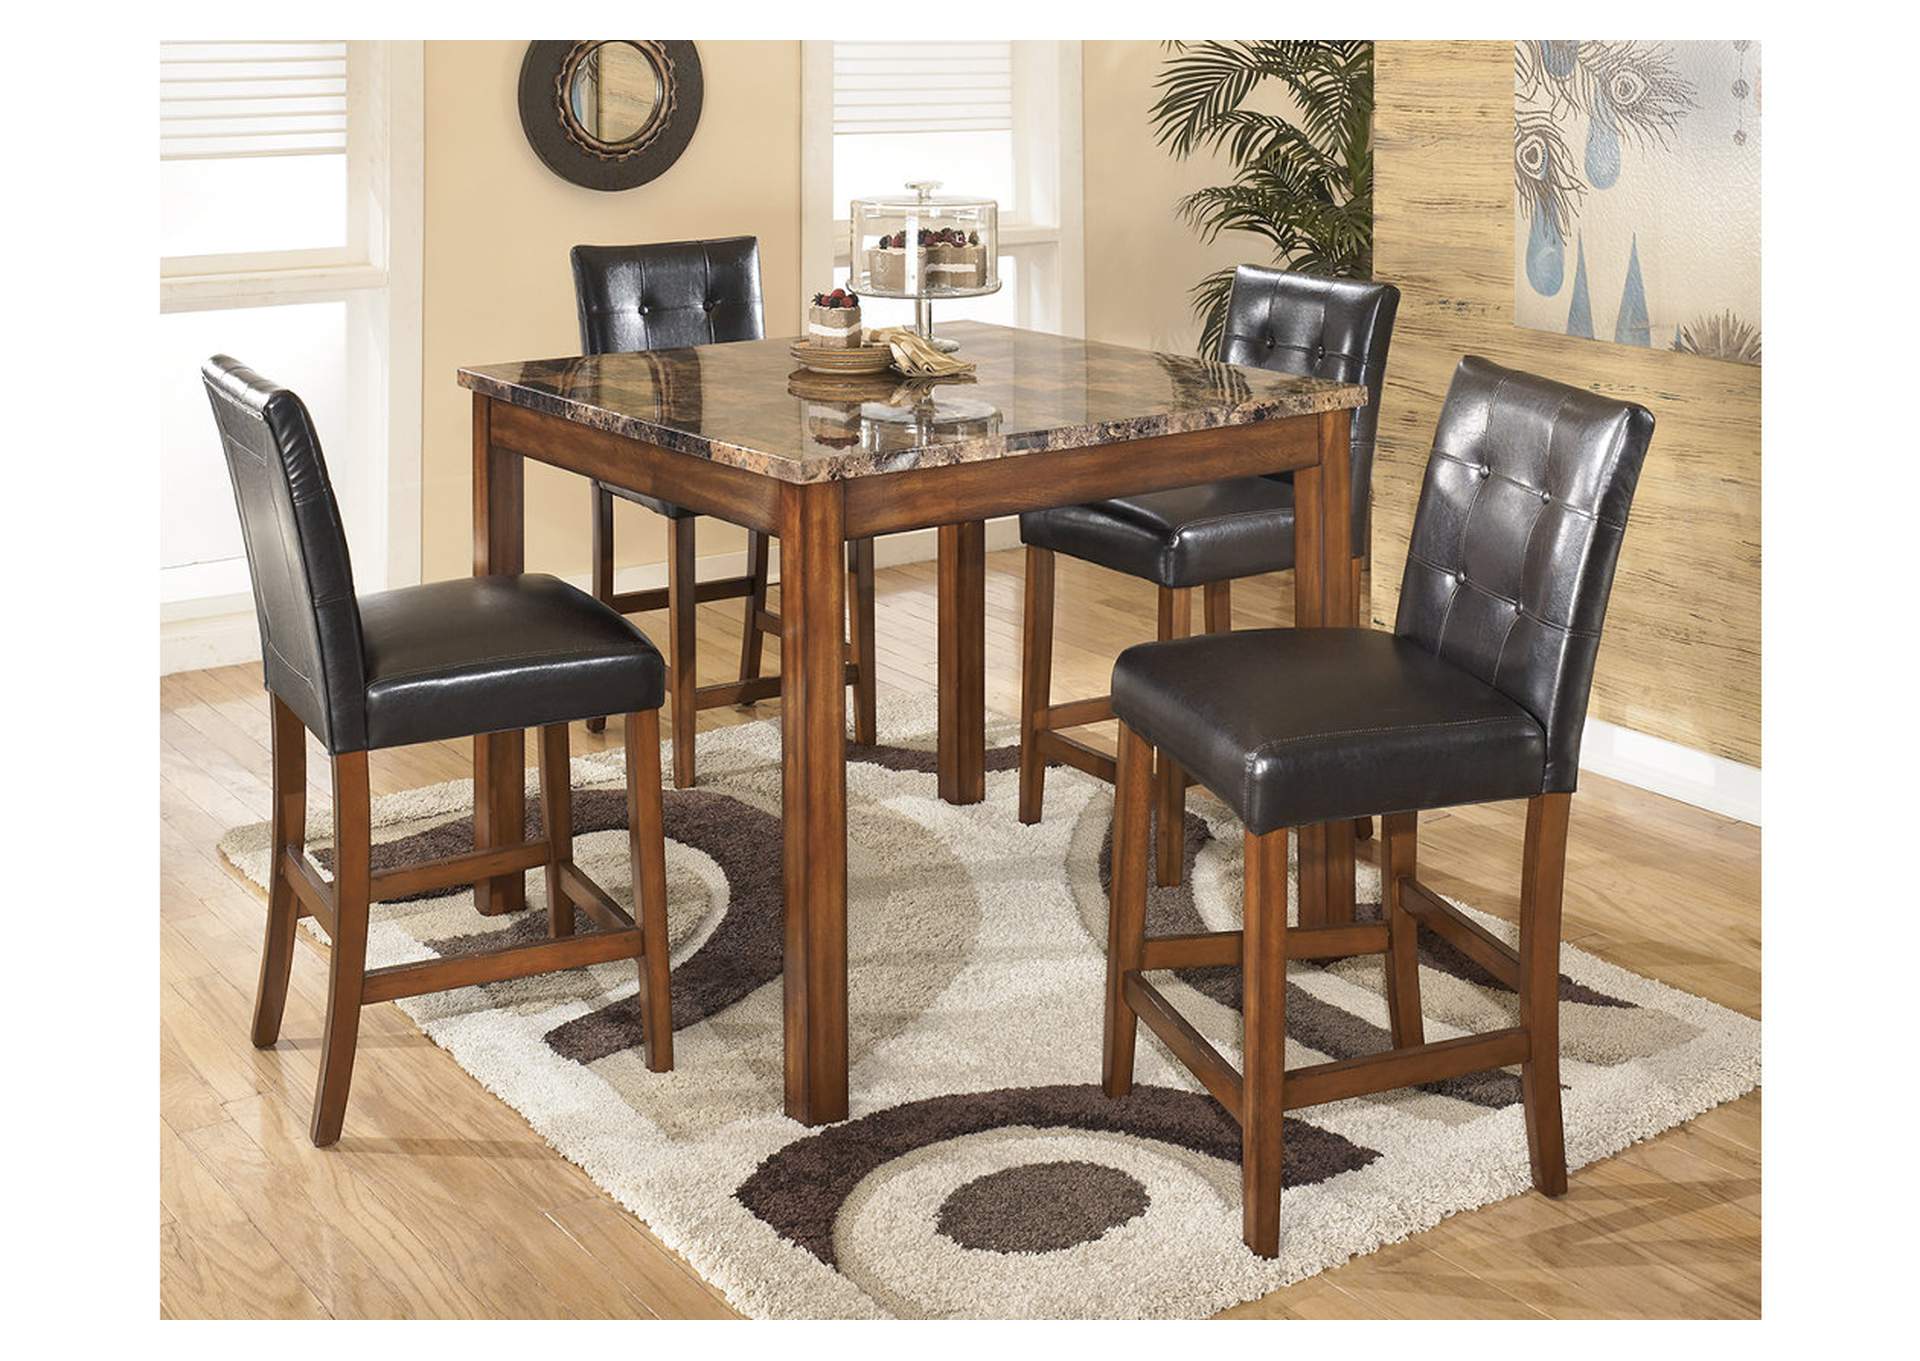 Tucker Furniture Theo 5 Piece Counter Height Dining Set